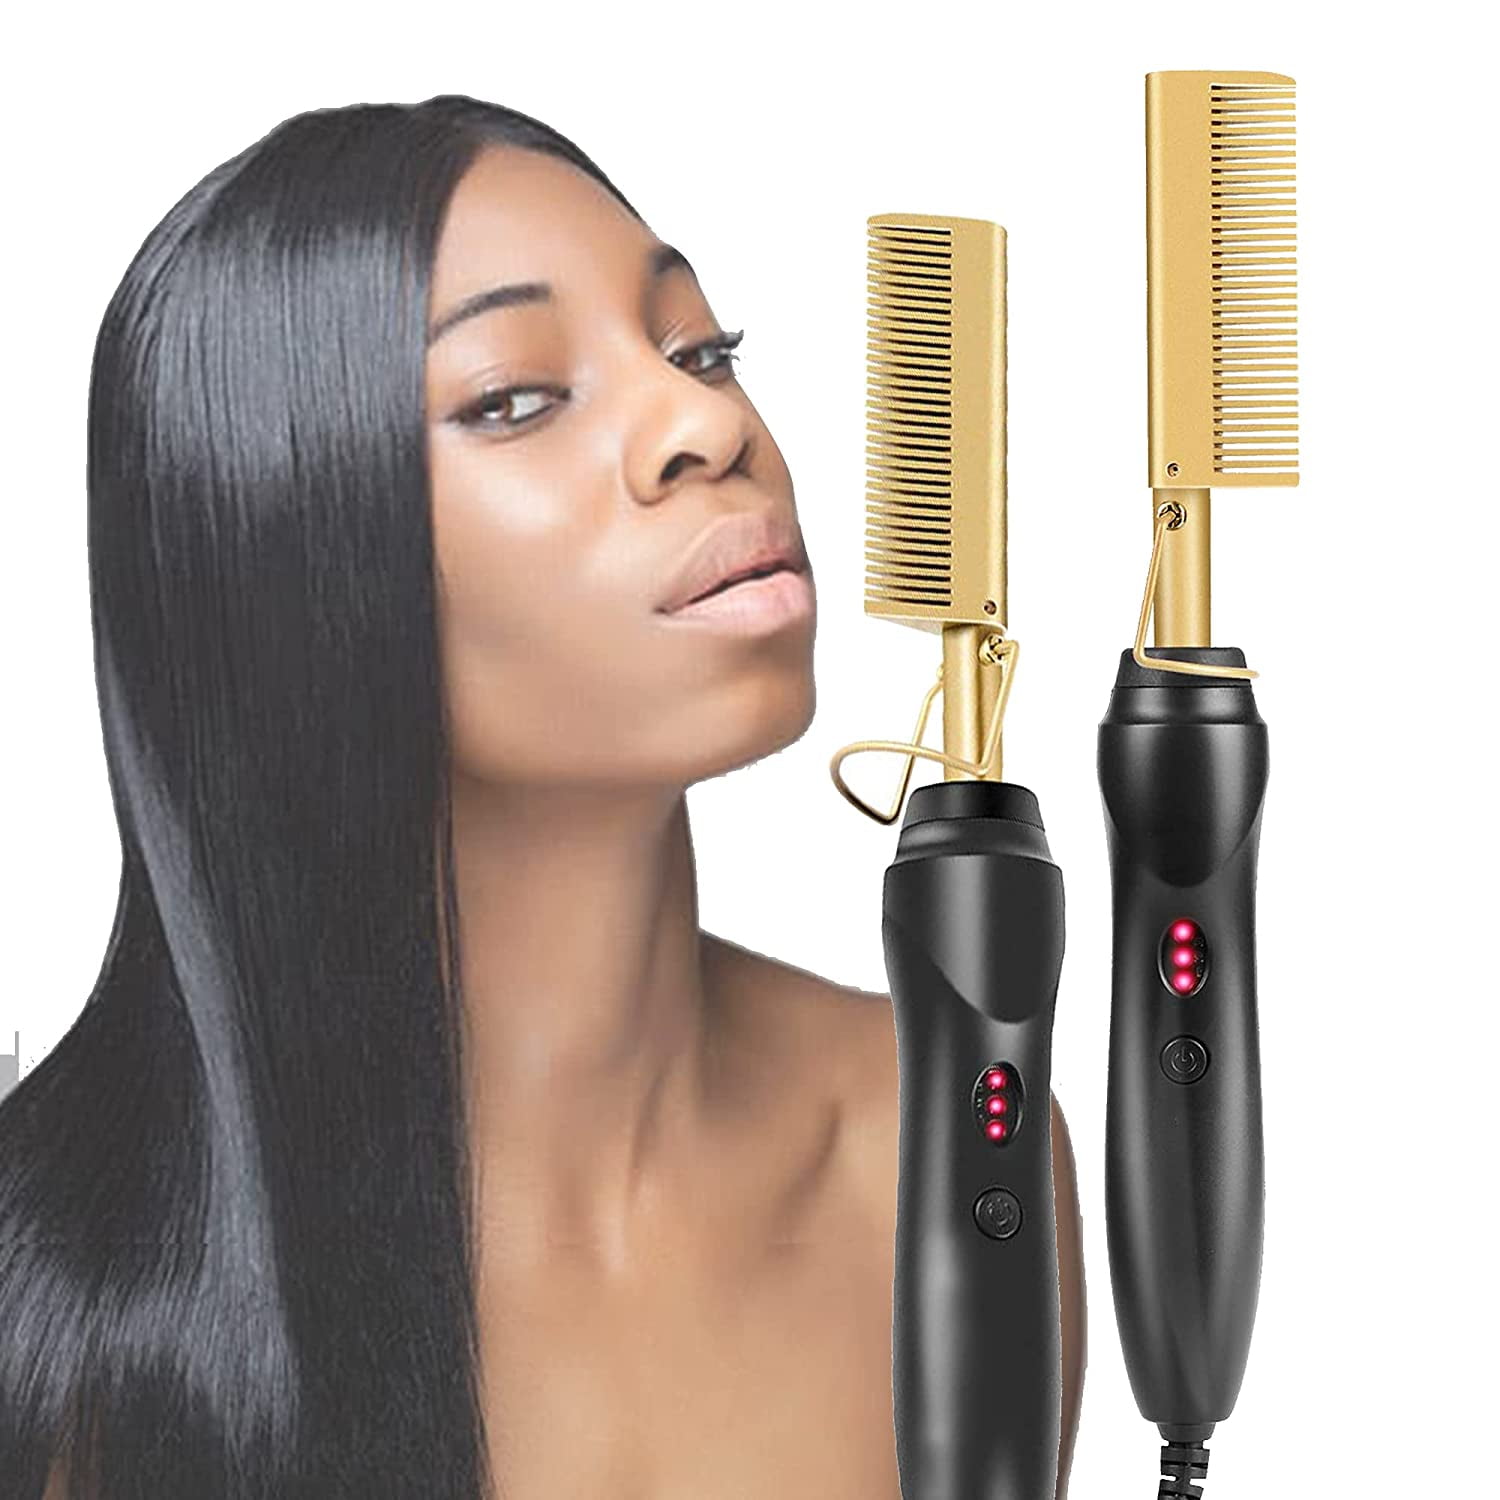 Hot Comb Hair straightener,Pressing Comb,Electric Heating Straighten Comb,Ceramic  Comb Security Portable Curling Iron Heated Brush,Multifunctional Copper Hot Straightening  Comb 